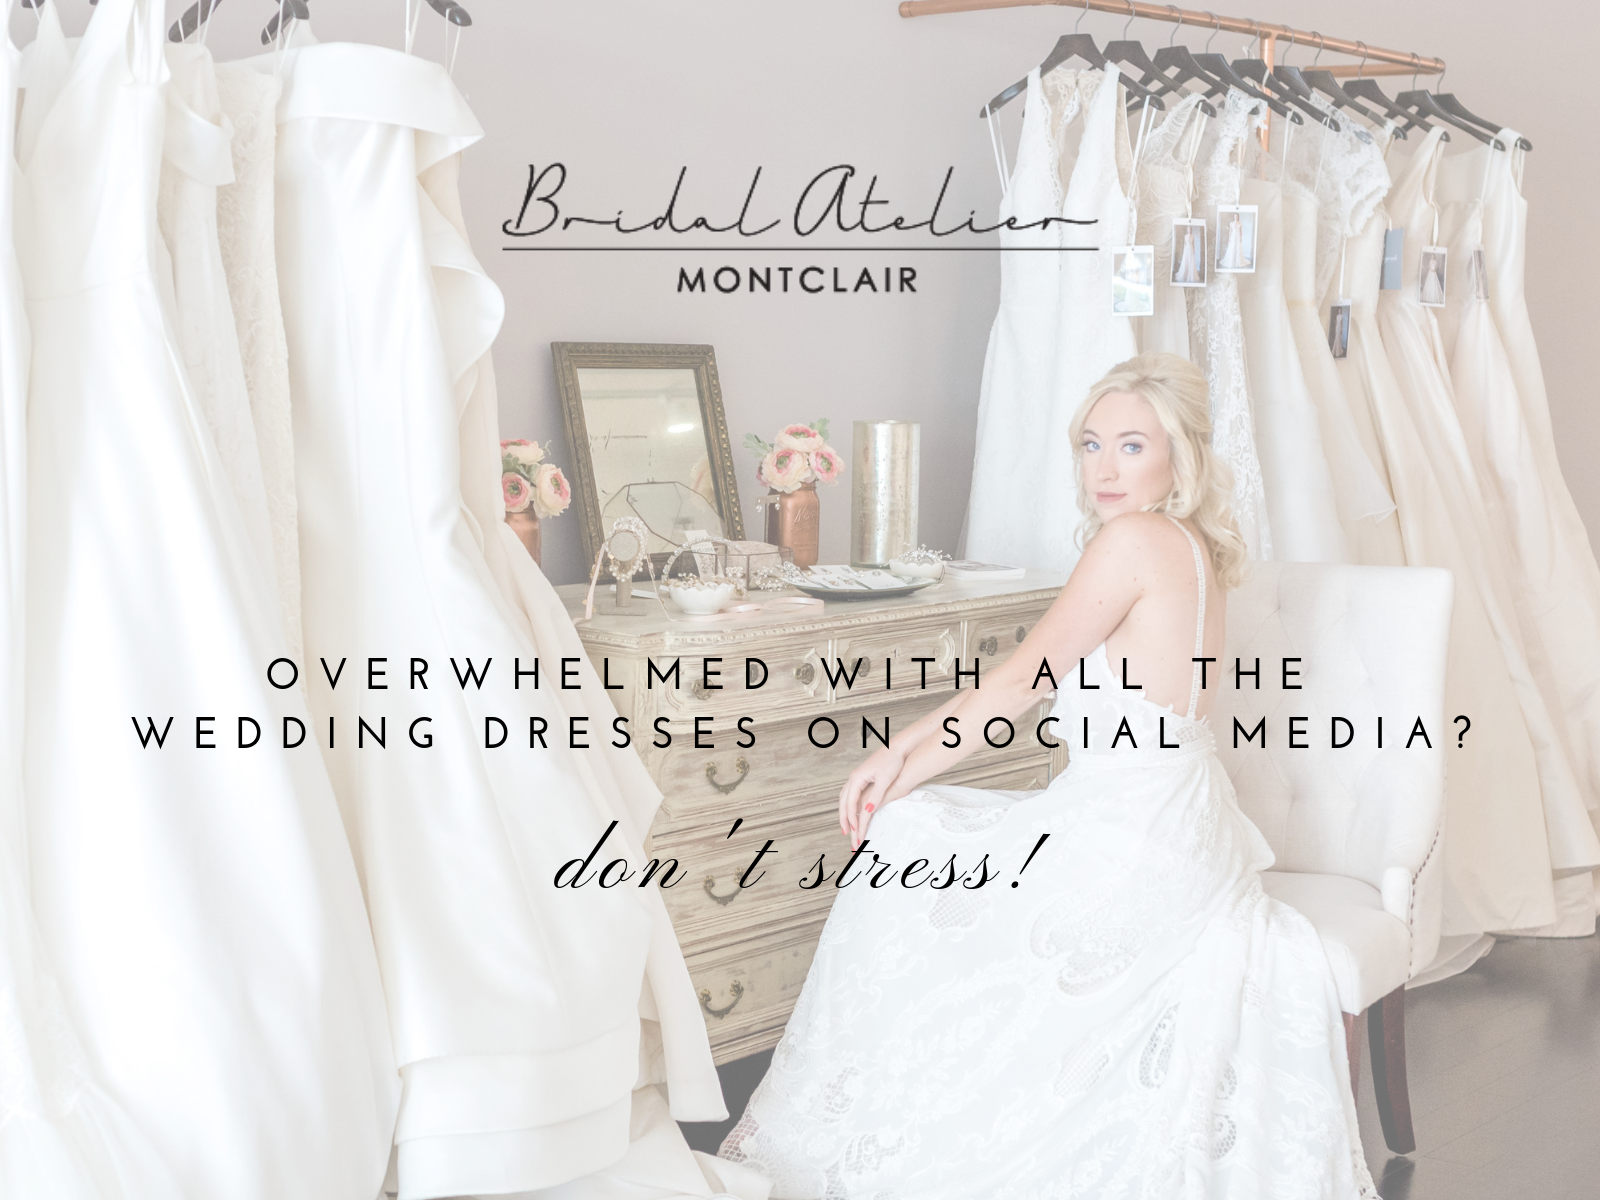 OVERWHELMED WITH ALL THE WEDDING DRESSES ON SOCIAL MEDIA? DON’T STRESS! Image